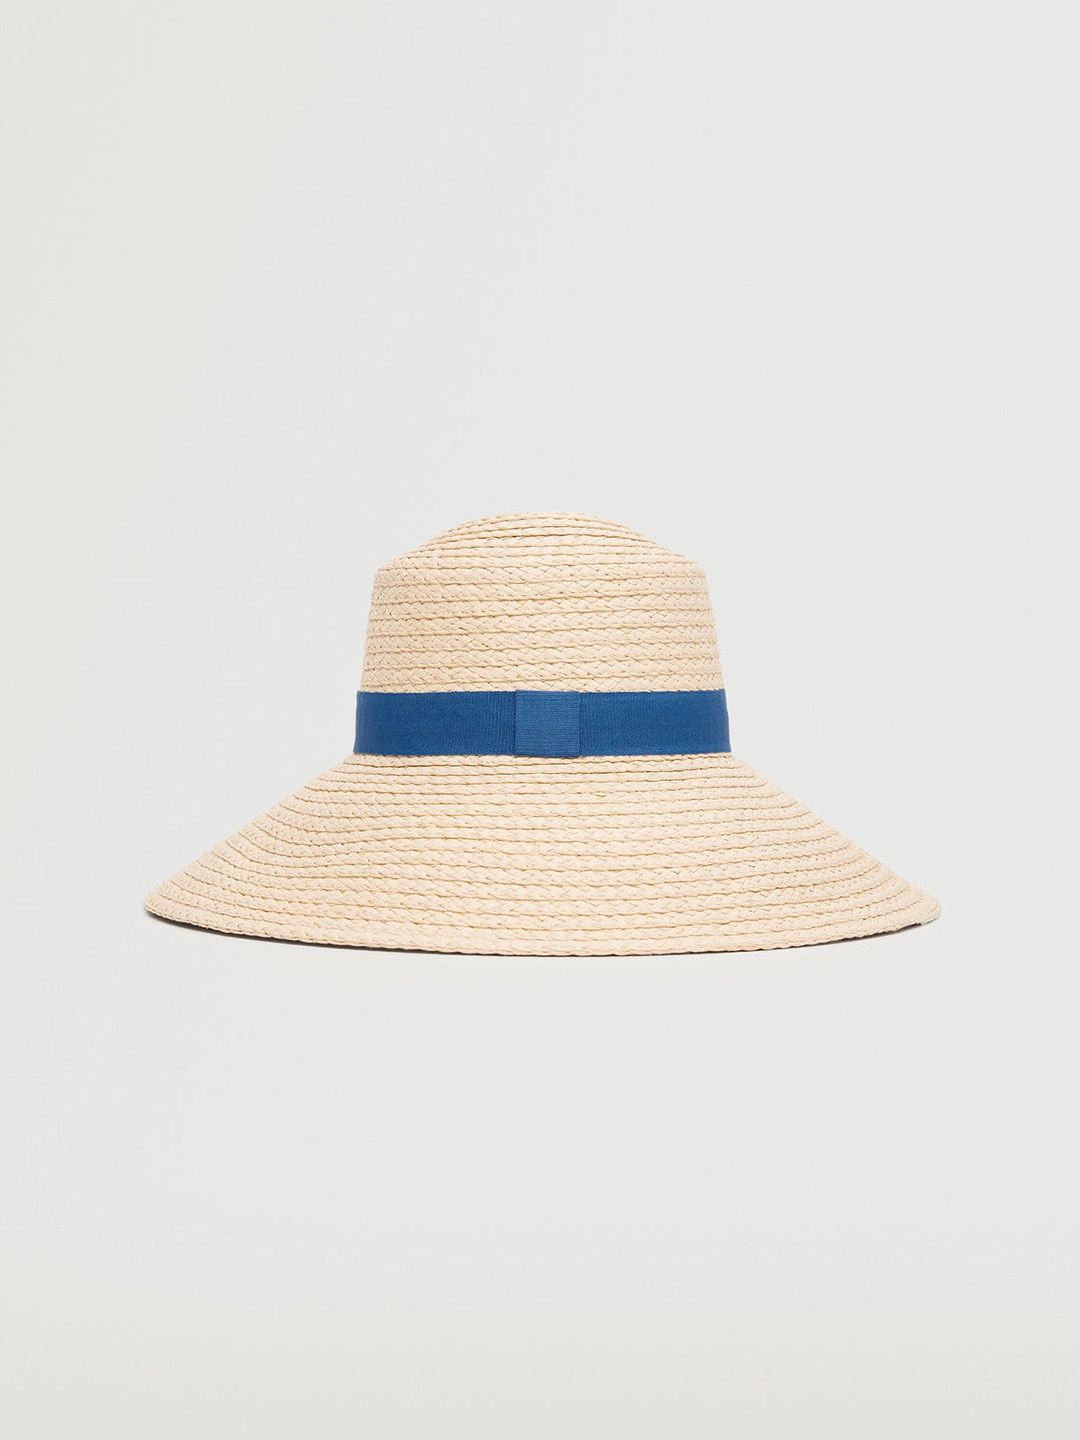 MANGO Women Cream-Coloured & Navy Blue Basket Woven Design Fedora Hat with Striped Detail Price in India